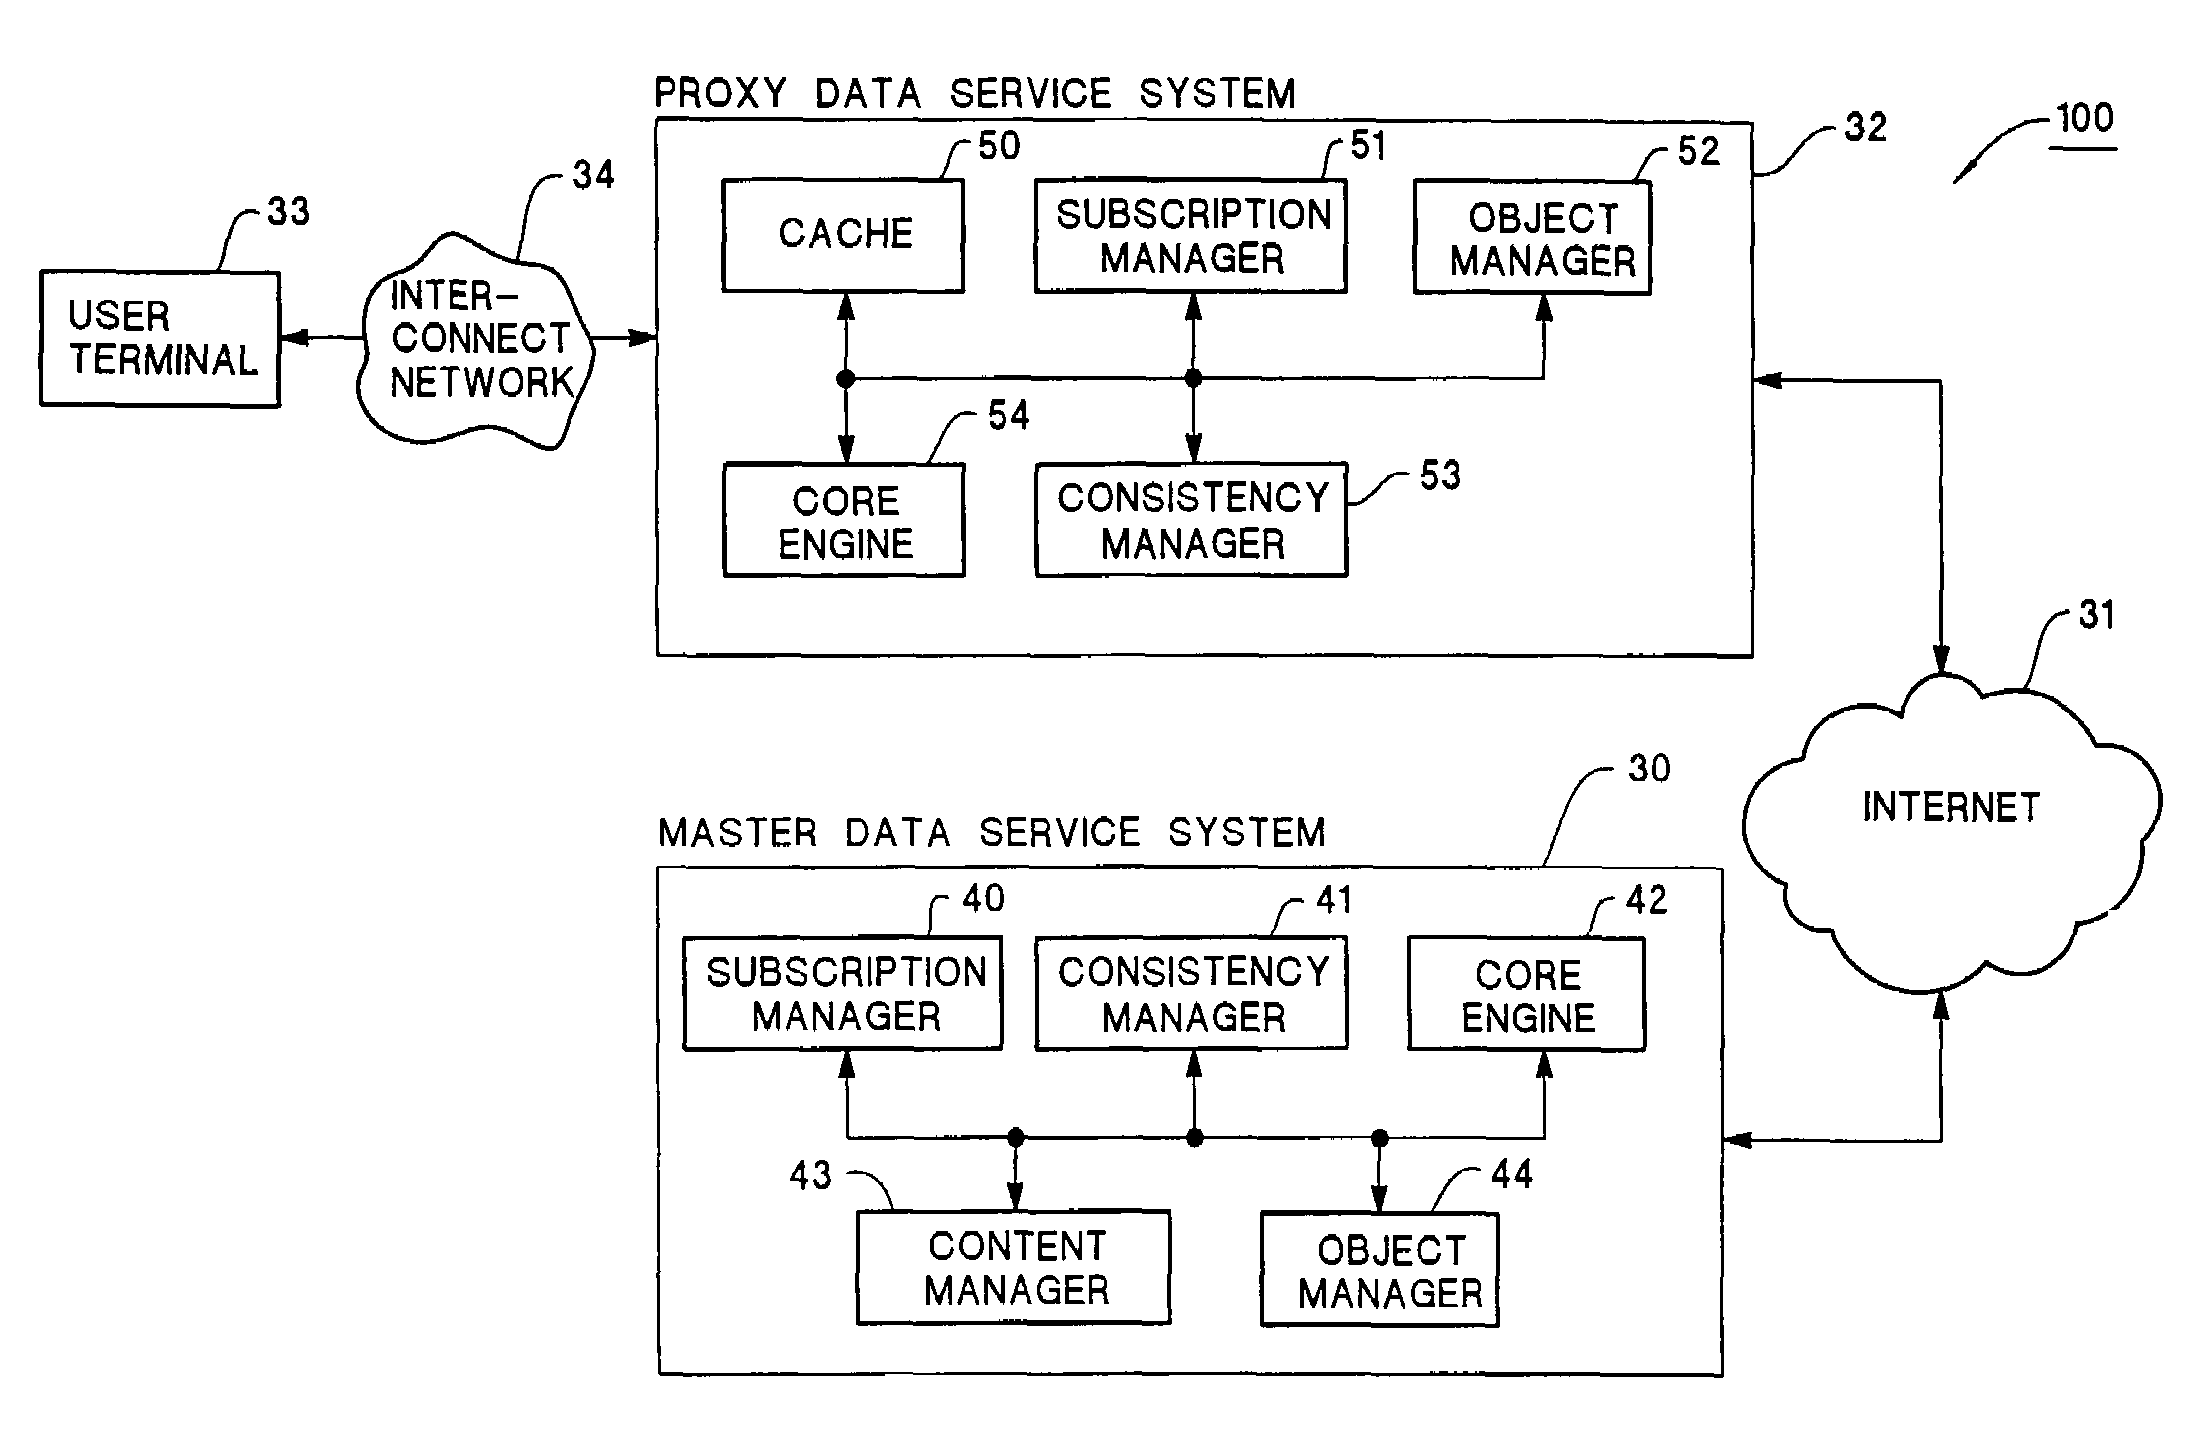 Content consistency in a data access network system